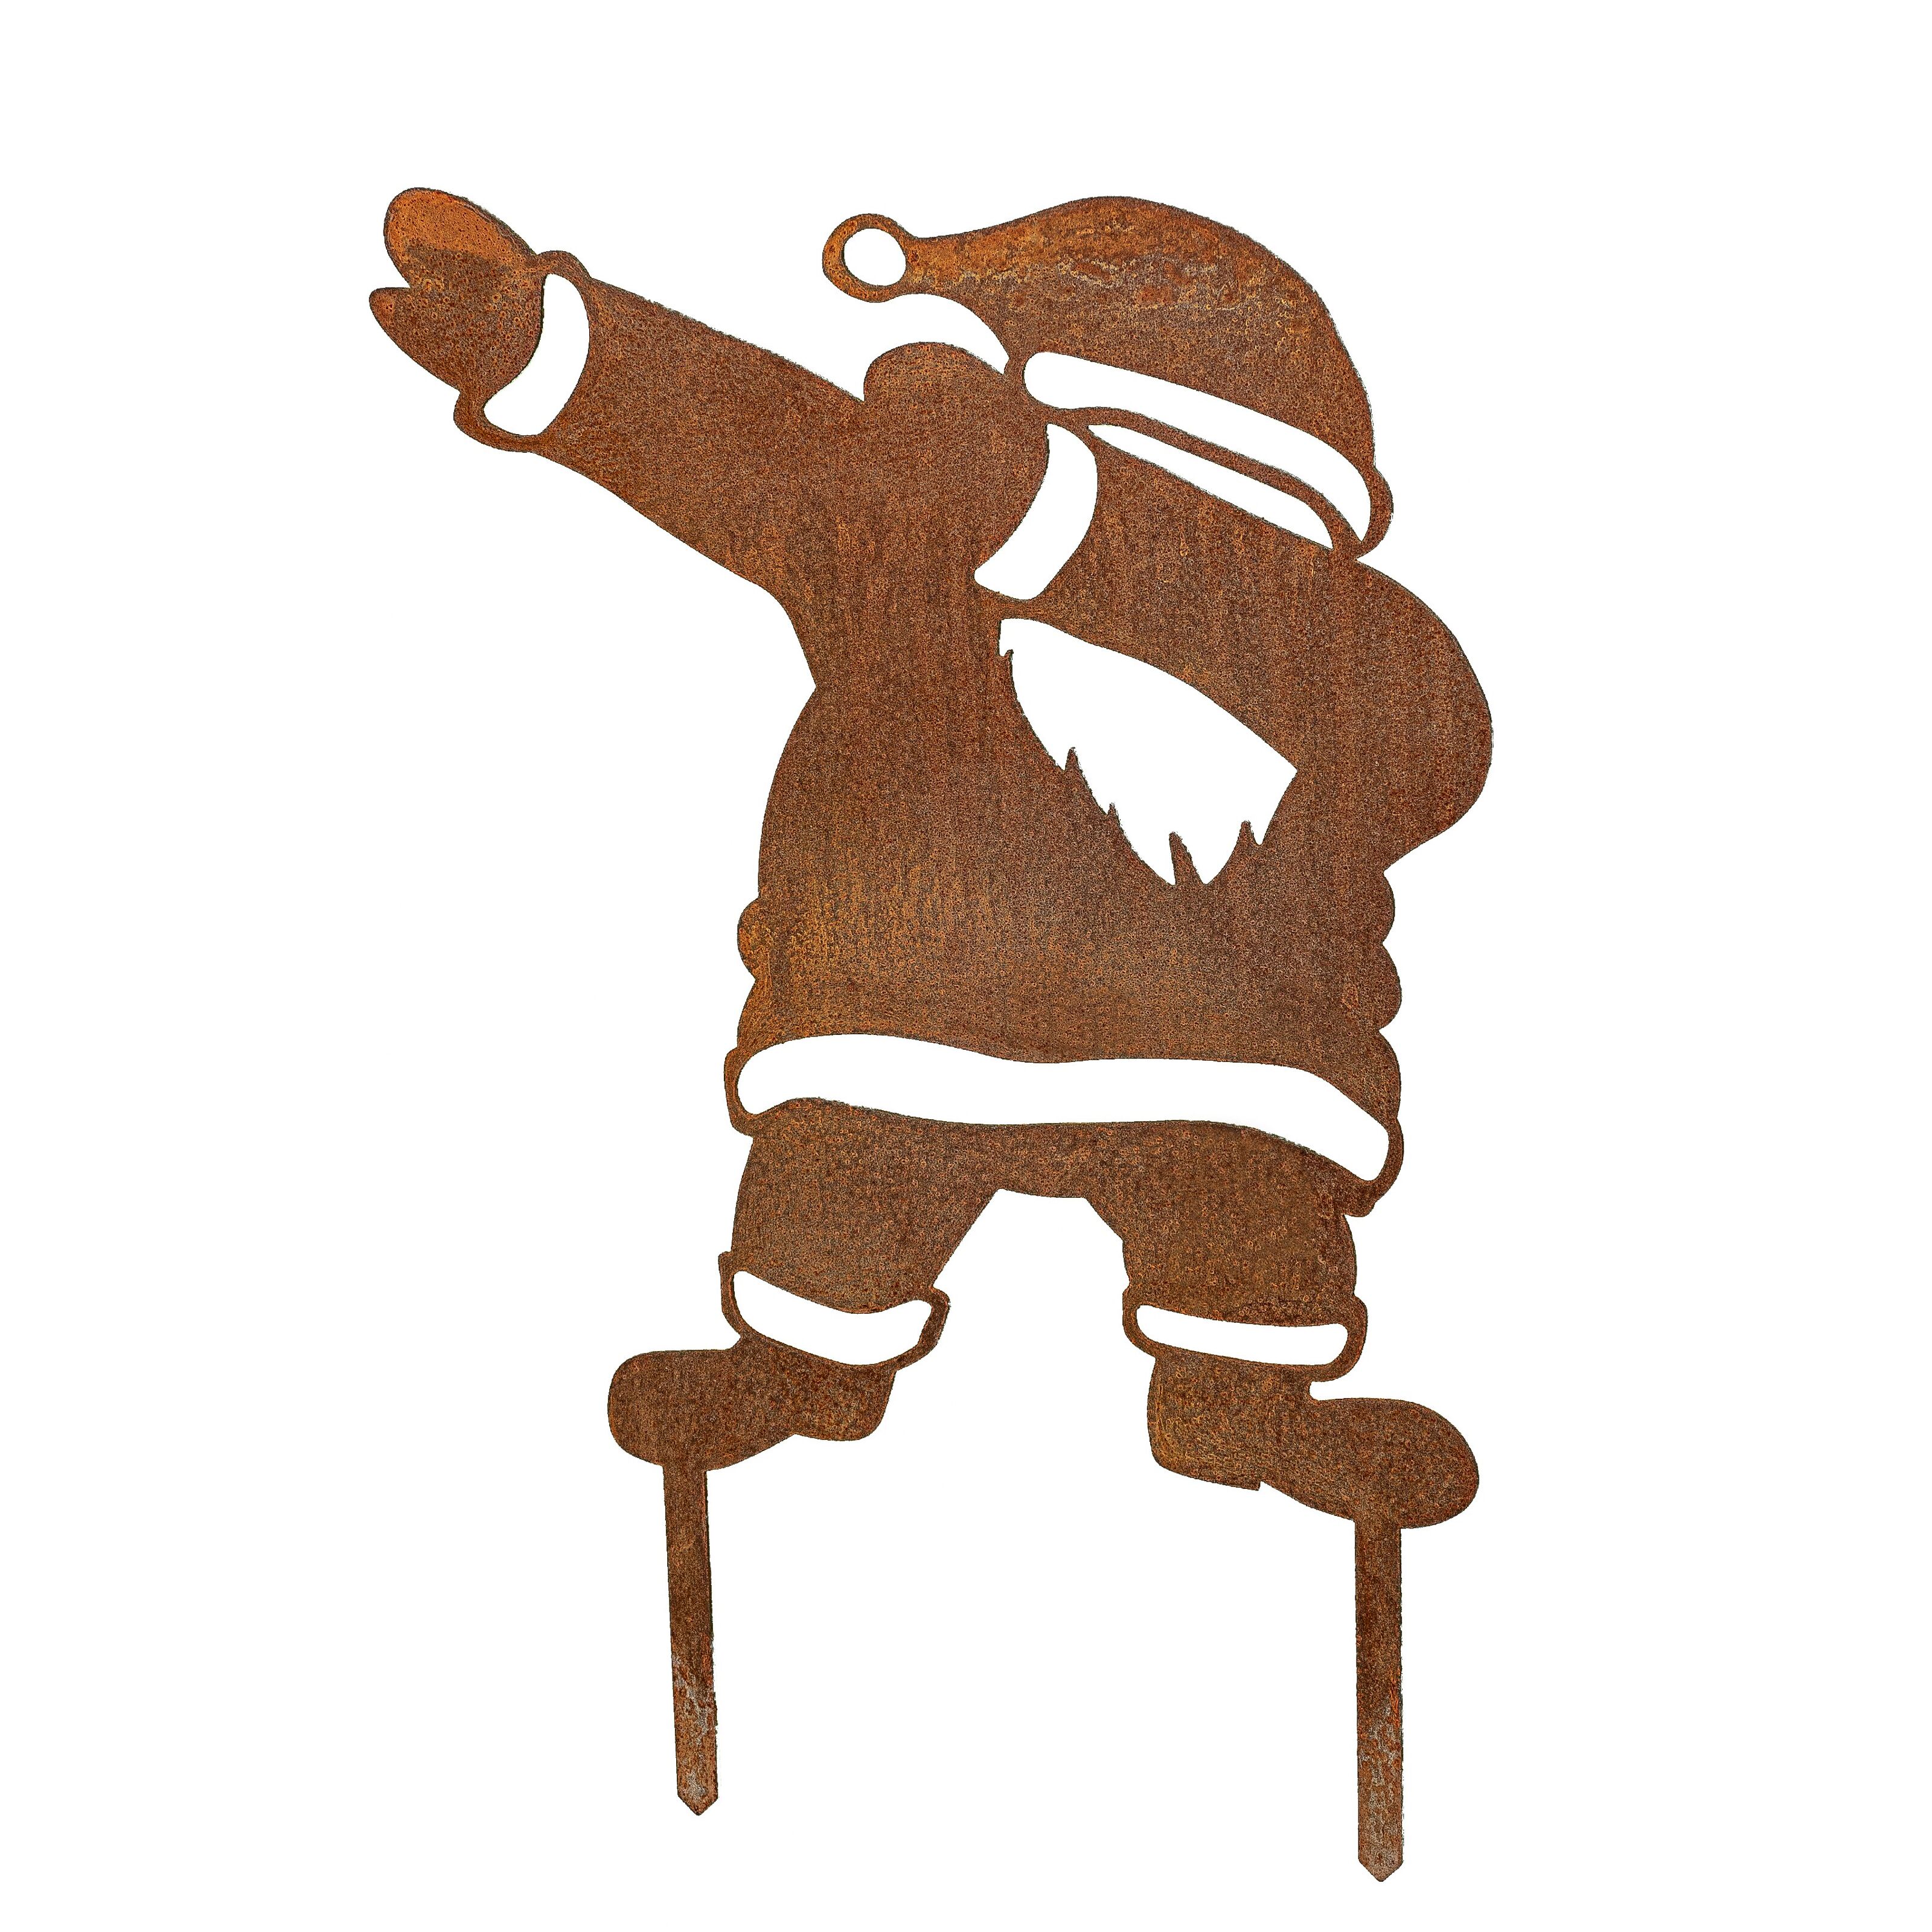 Buy wholesale MM Steel Styles rust garden to steel decoration easy decoration made Funny of decoration high-quality Garden Santa rust - Claus corten - Christmas Stake / insert